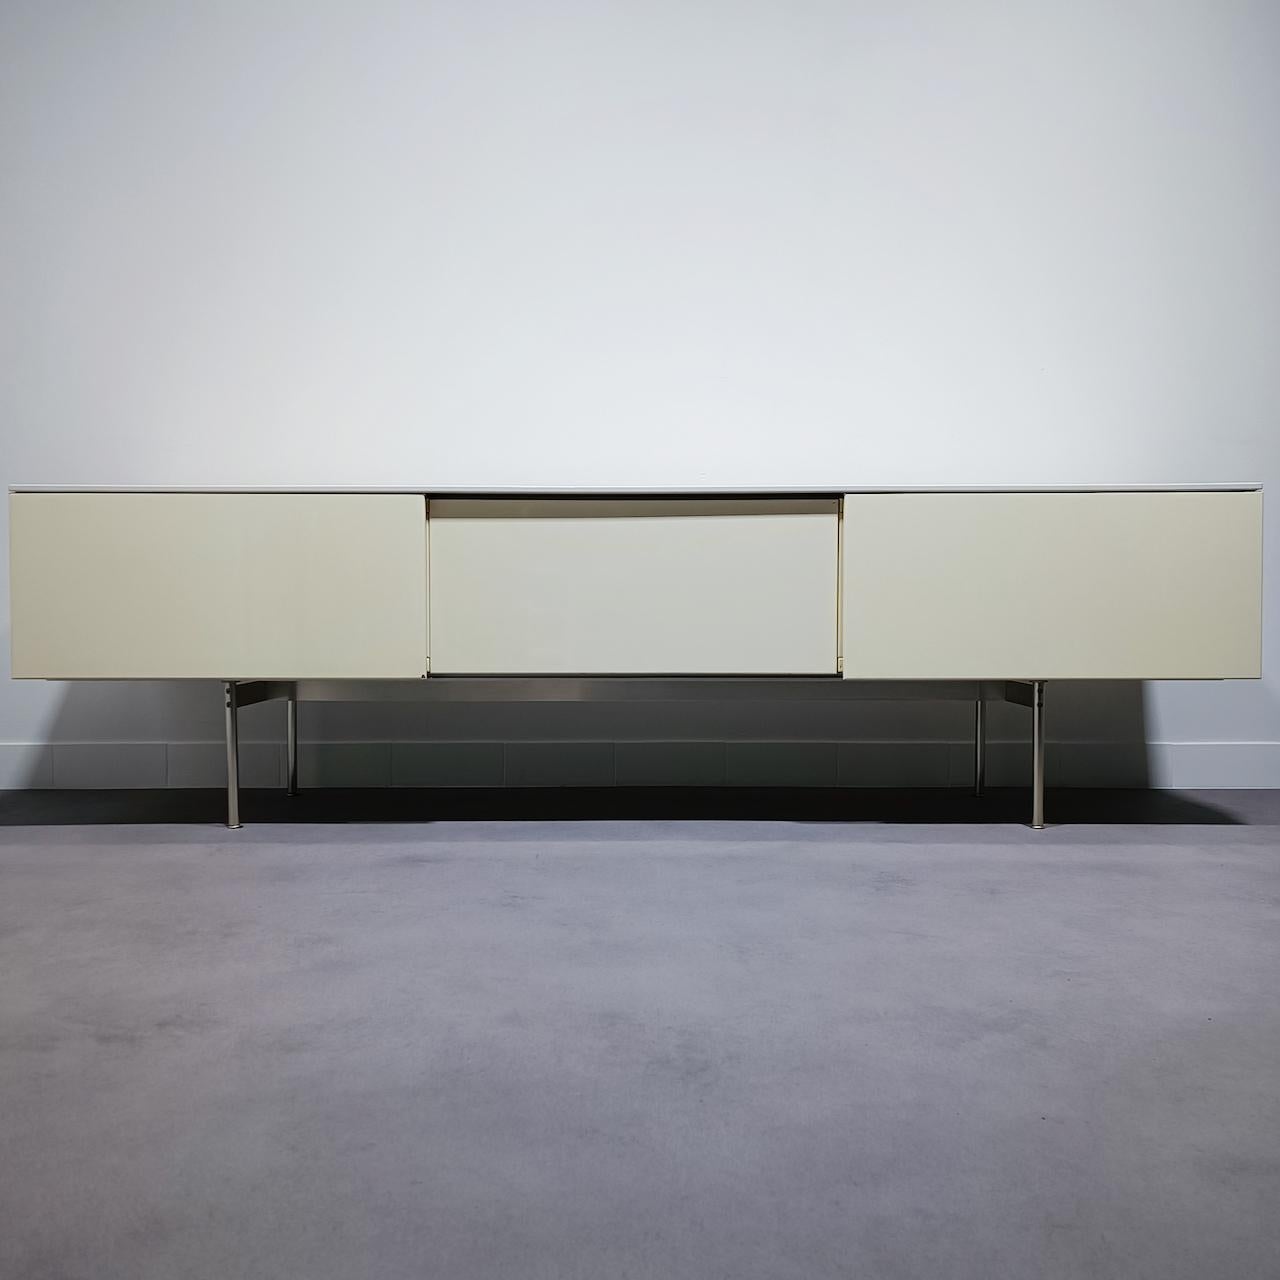 XILITALIA WHITE LACQUER SIDEBOARD BY ANTONIO CITTERIO & PAOLO NAVA

Xilitalia white lacquer sideboard
nickel plated metal base
Sliding doors and one drawer
Finished all around

Designers: Antonio Citterio & Paolo Nava
Producer: Xilitalia
Origal